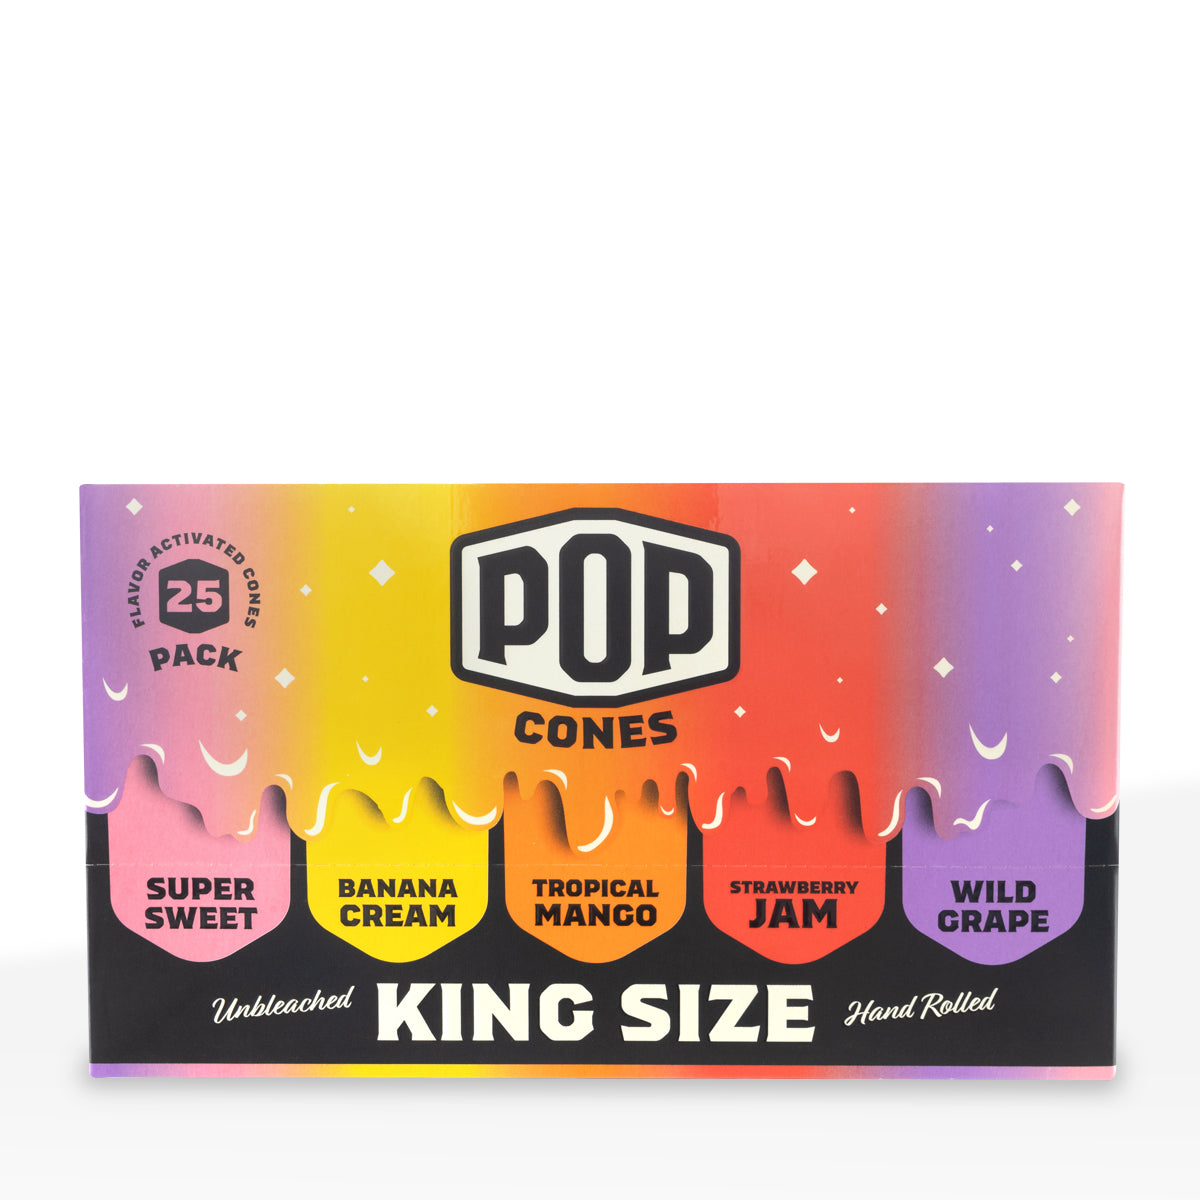 Pop Cones | Pre-Rolled Cones King Size | 109mm - Assorted Flavors - 3 Pack 25 Count - Unbleached Paper